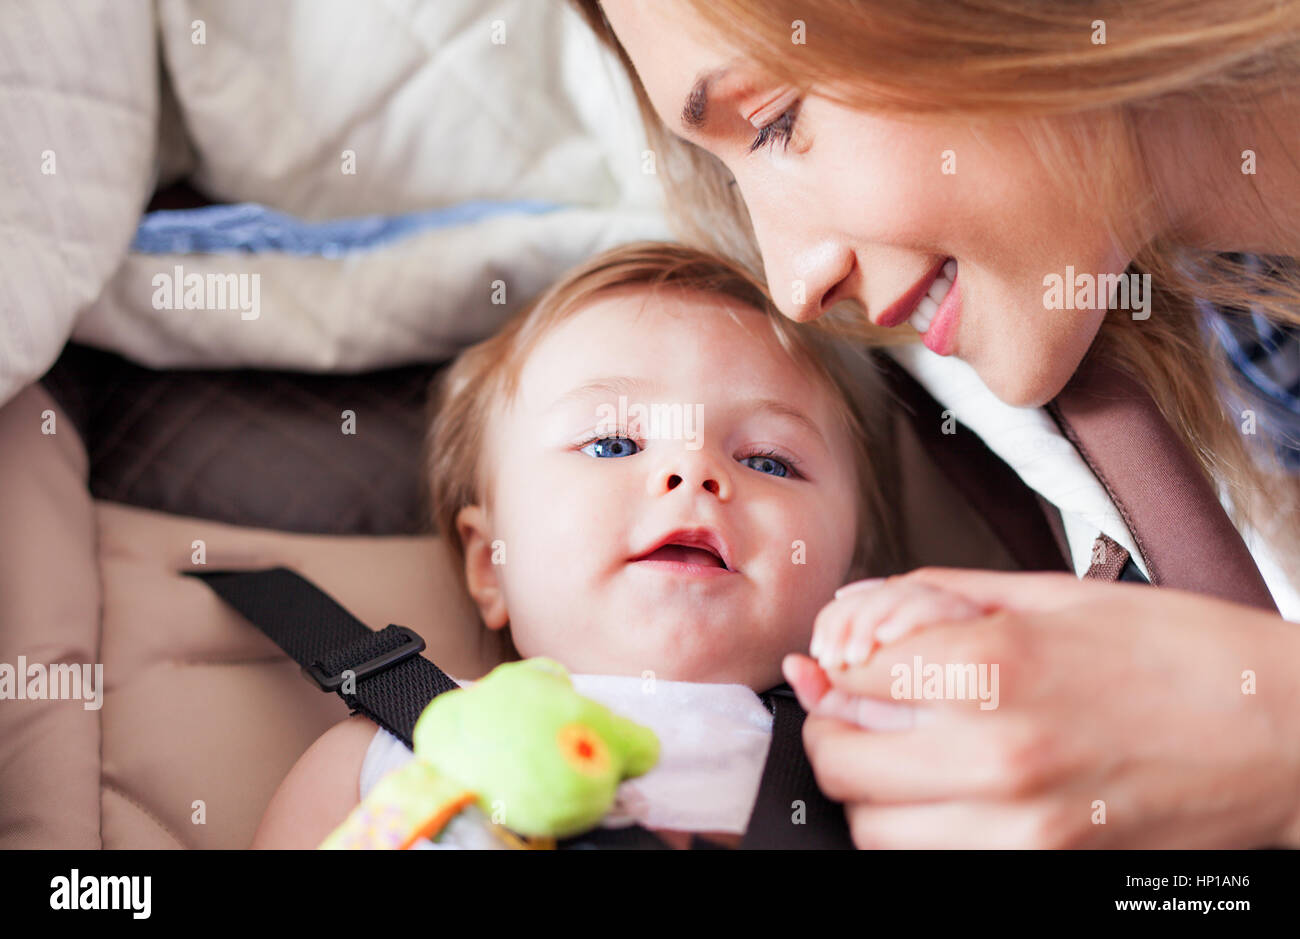 A loving mother is holding the small hand of her babe boy while he is smiling. Stock Photo